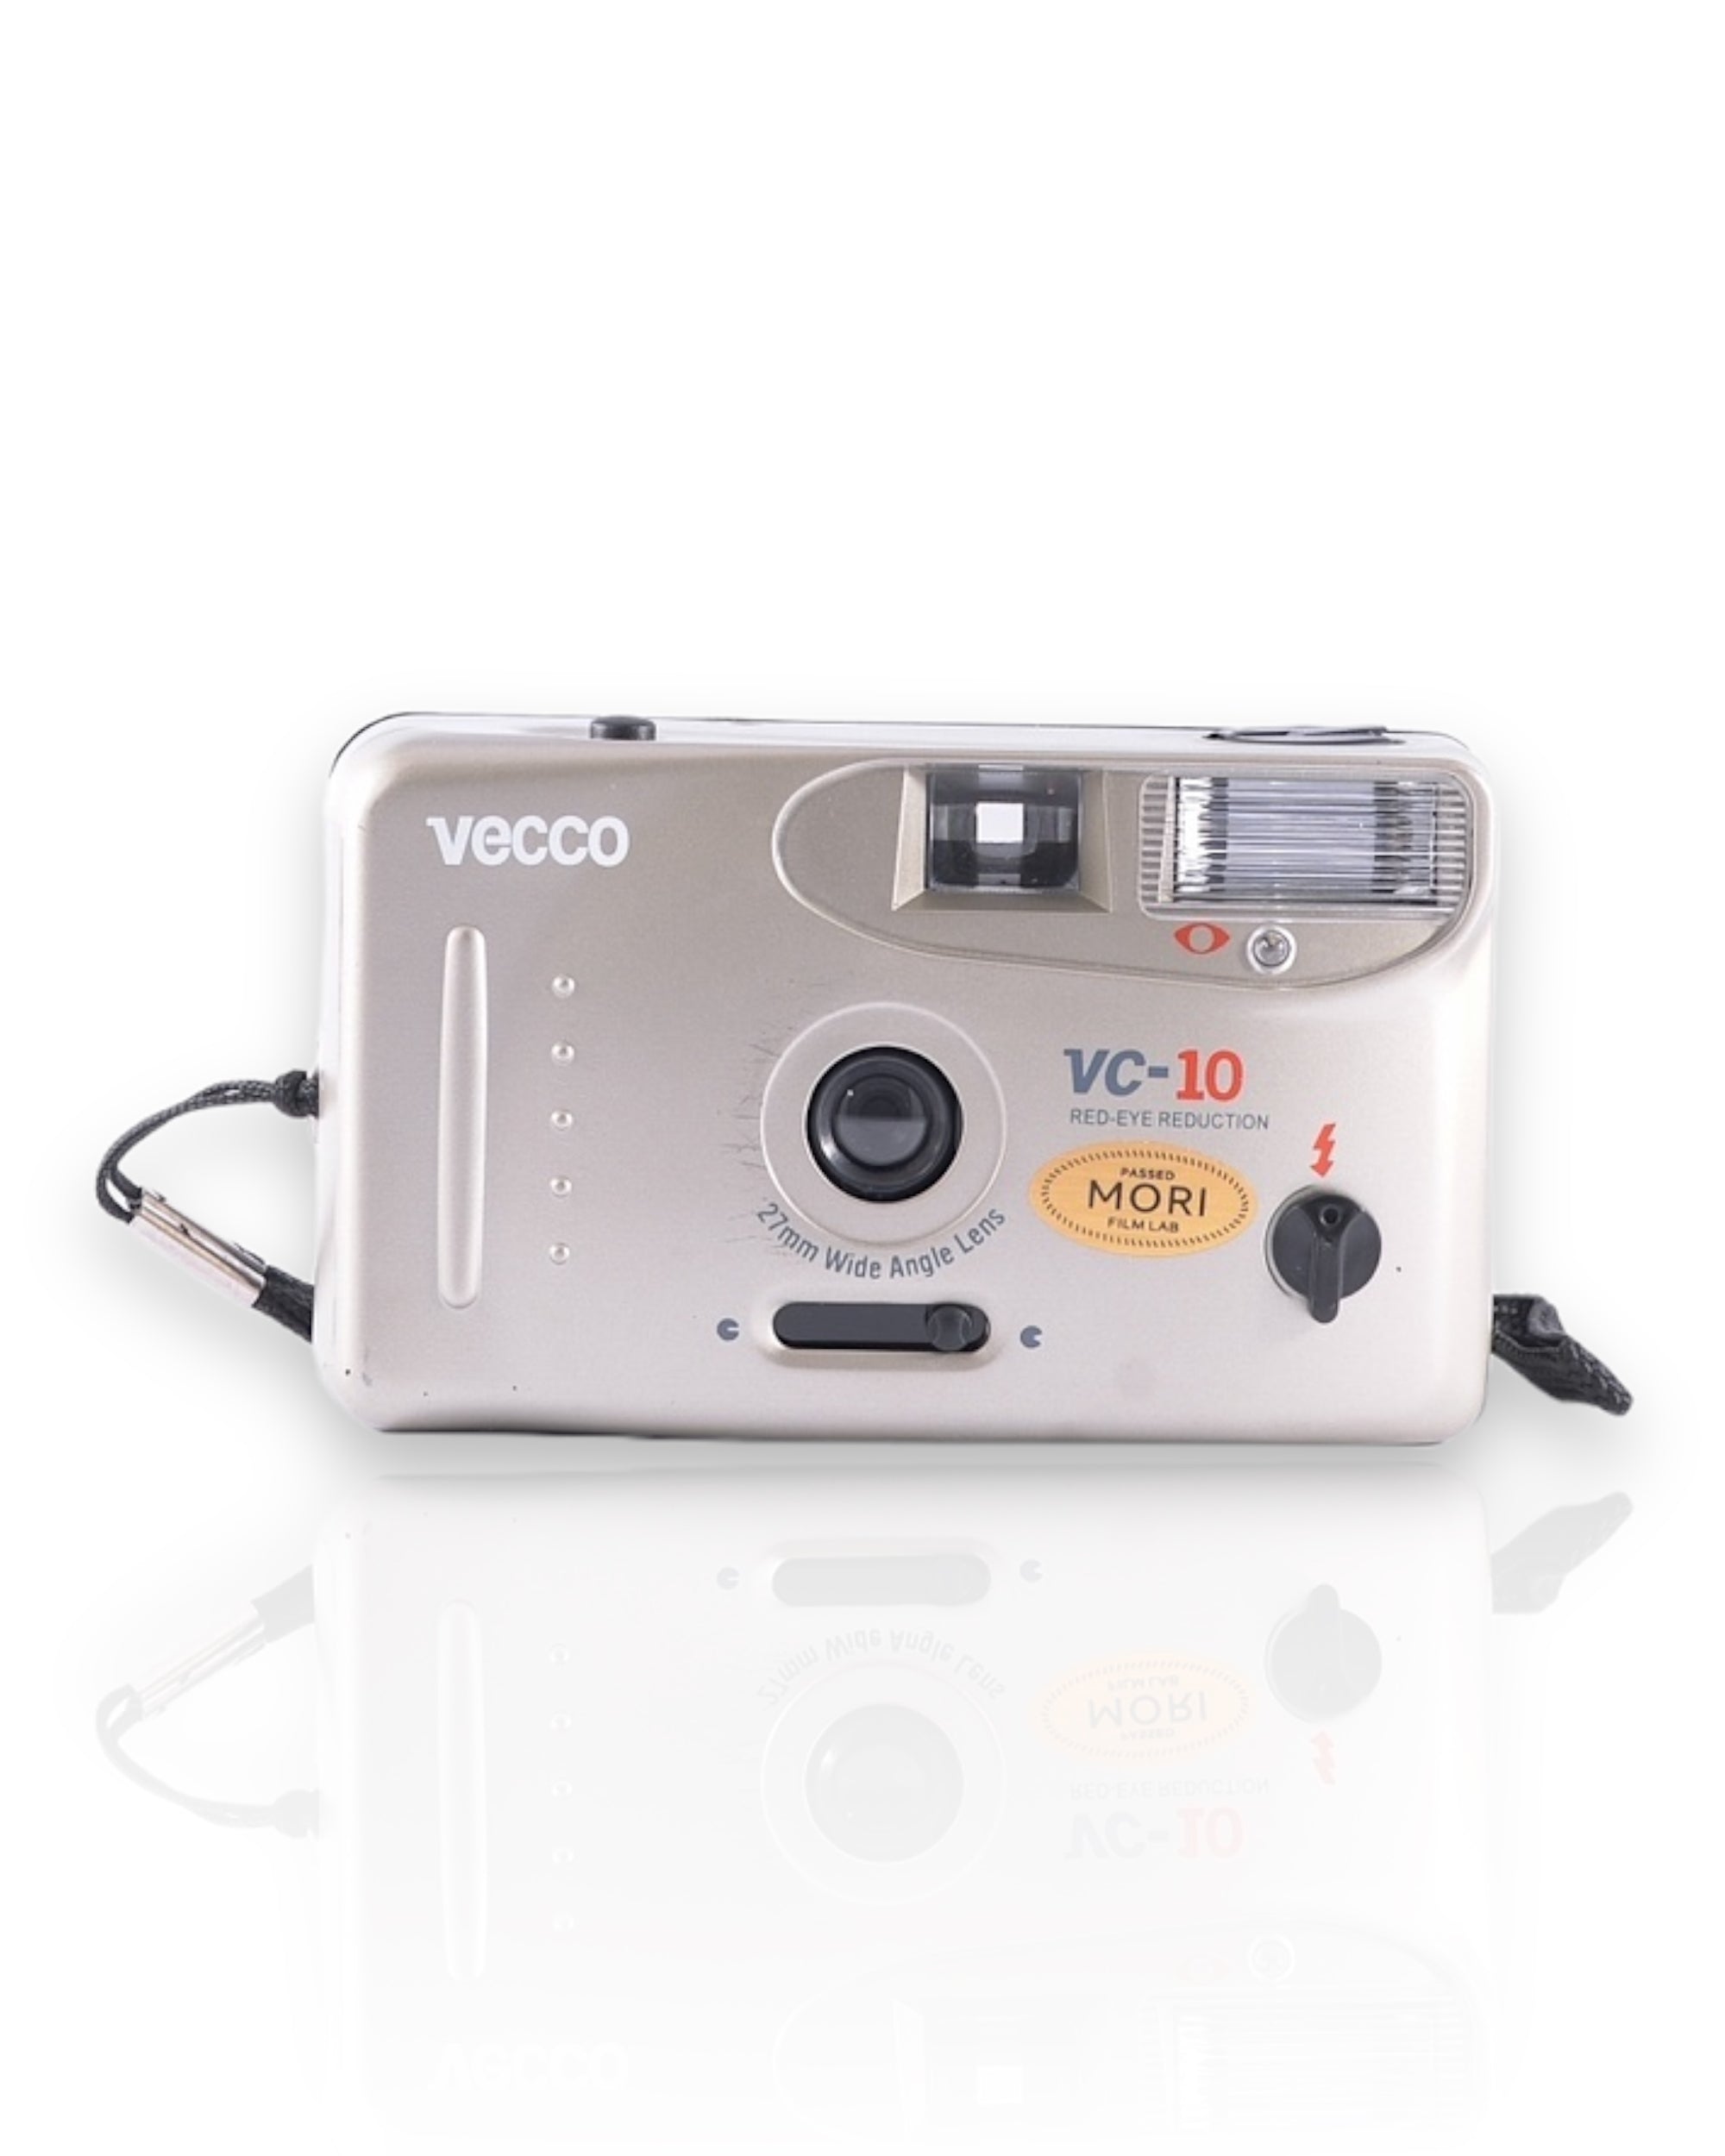 Vecco VC-10 35mm Point & Shoot film camera with 27mm lens